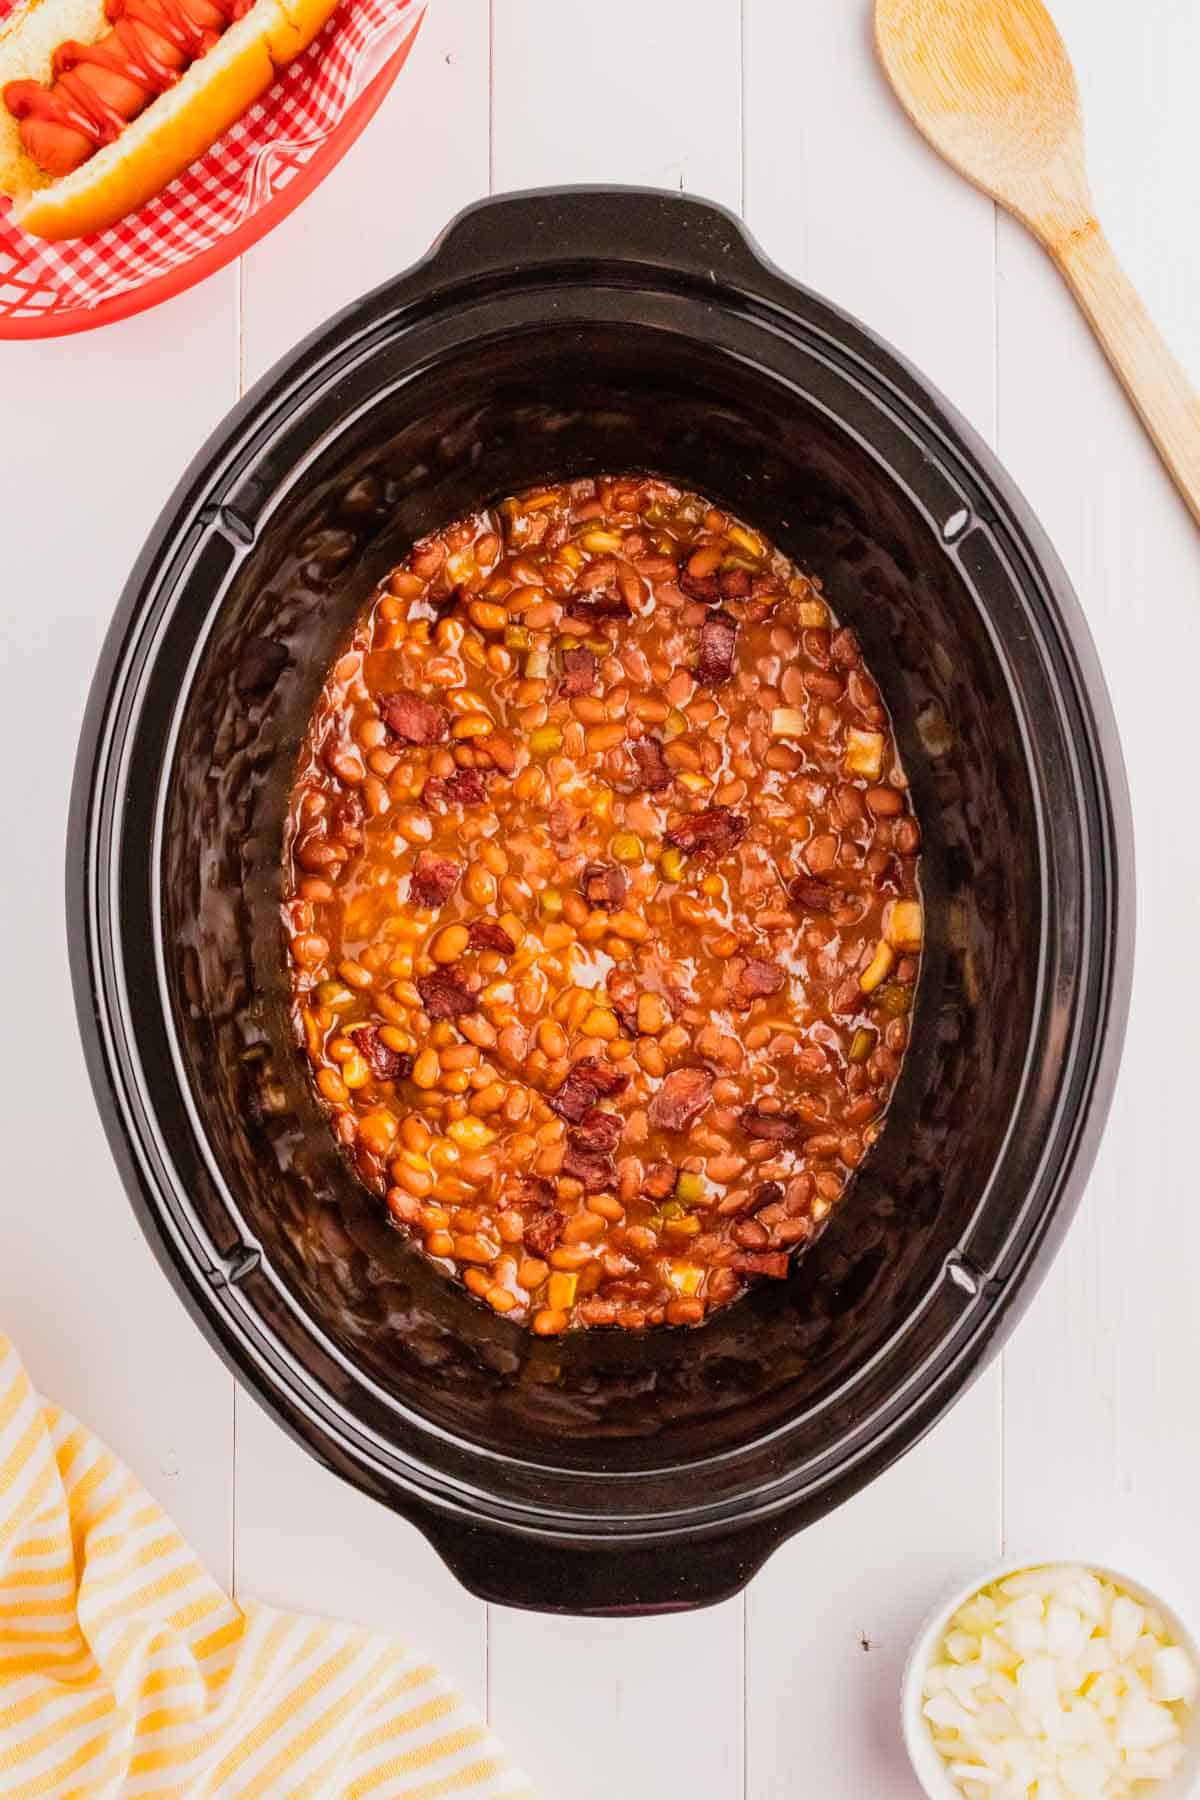 Crock Pot Baked Beans are a simple slow cooker side dish recipe made with canned baked beans, barbecue sauce, ketchup, brown sugar, bell peppers, onions and bacon.